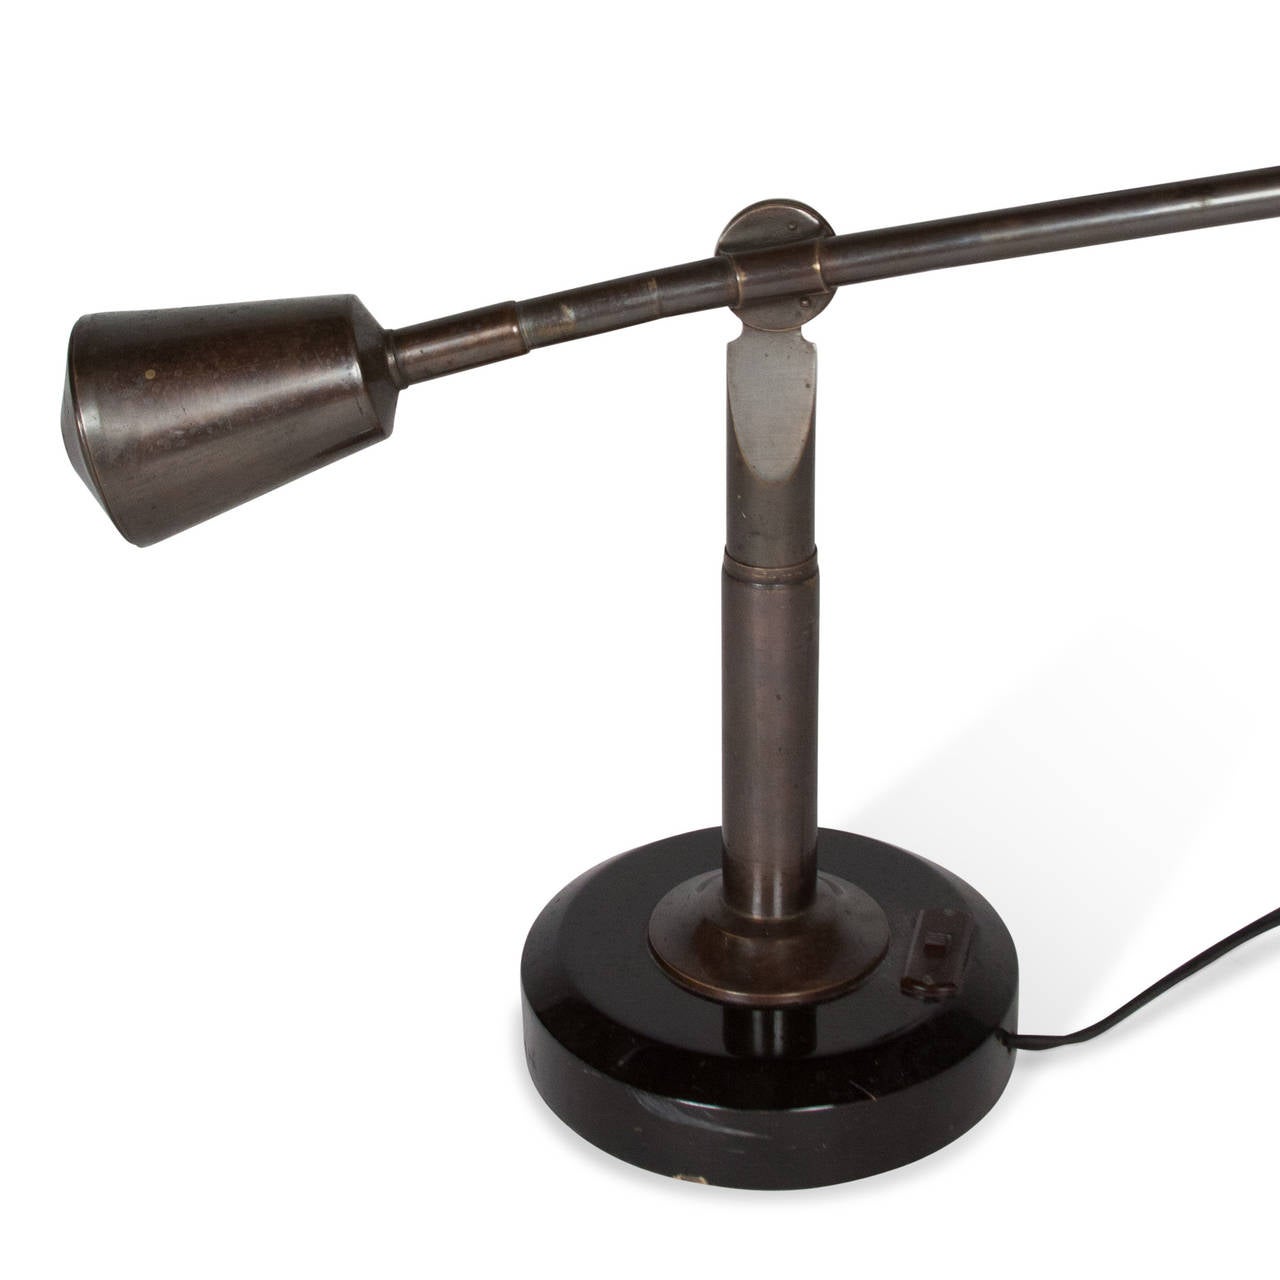 Aluminum Articulated Counterweight Desk Lamp by Edouard Wilfred Buquet, French 1928